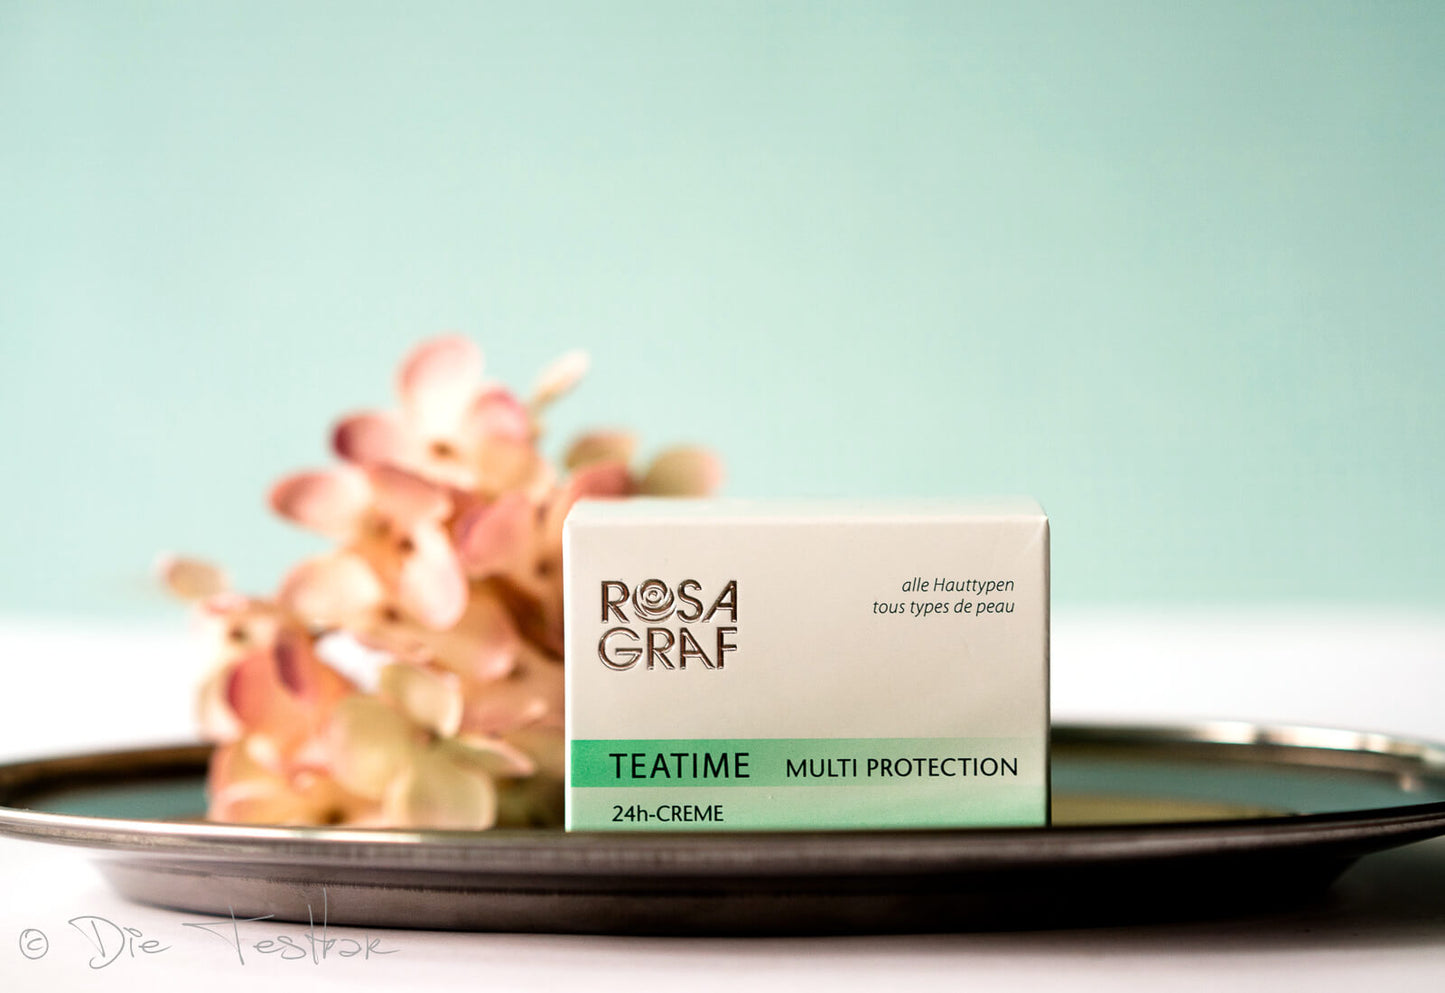 Special Offer - Teatime Multiprotection 50 ml